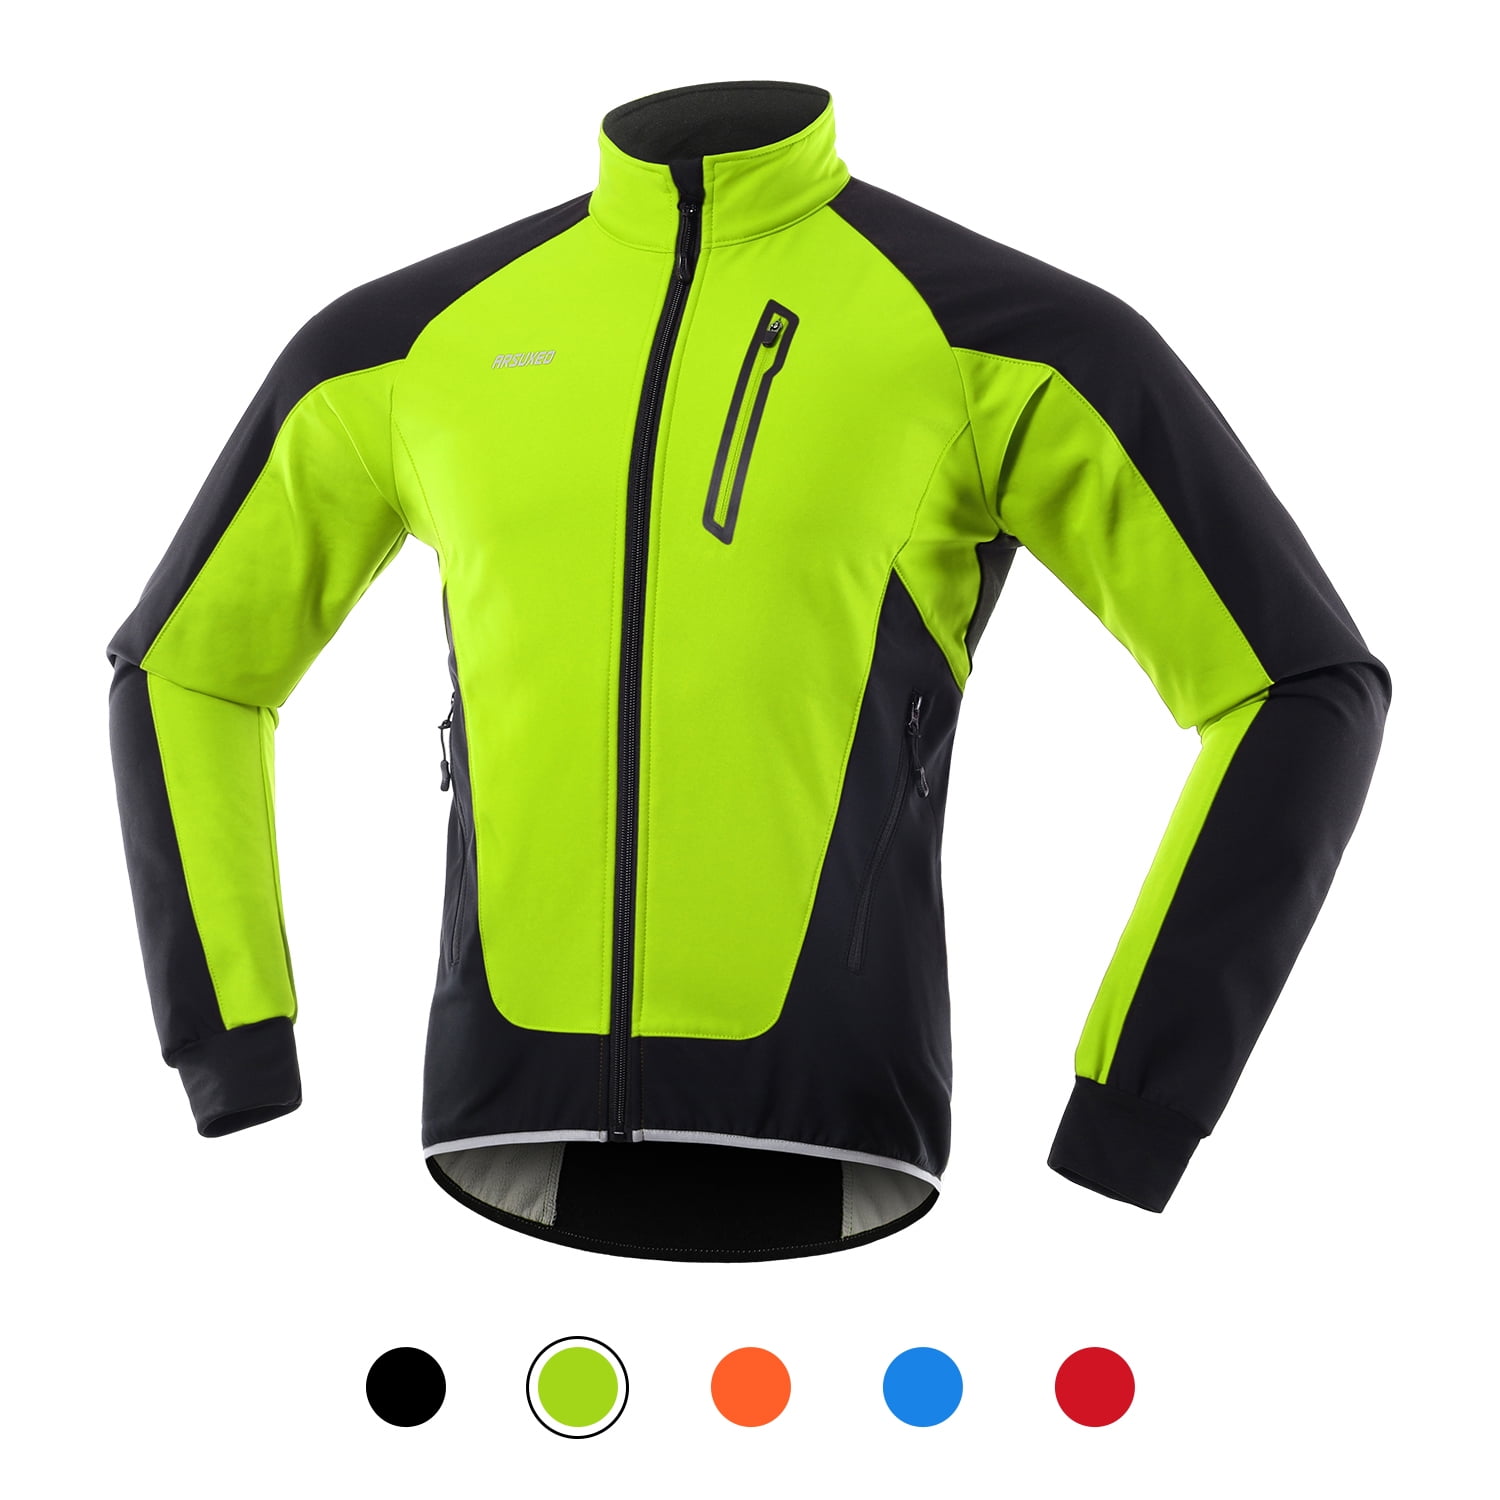 Dooy Men's Cycling Jersey Thermal Autumn Winter Long Sleeves Bike Jersey Breathable Softshell Jacket with Full Zipper and Rear Pockets